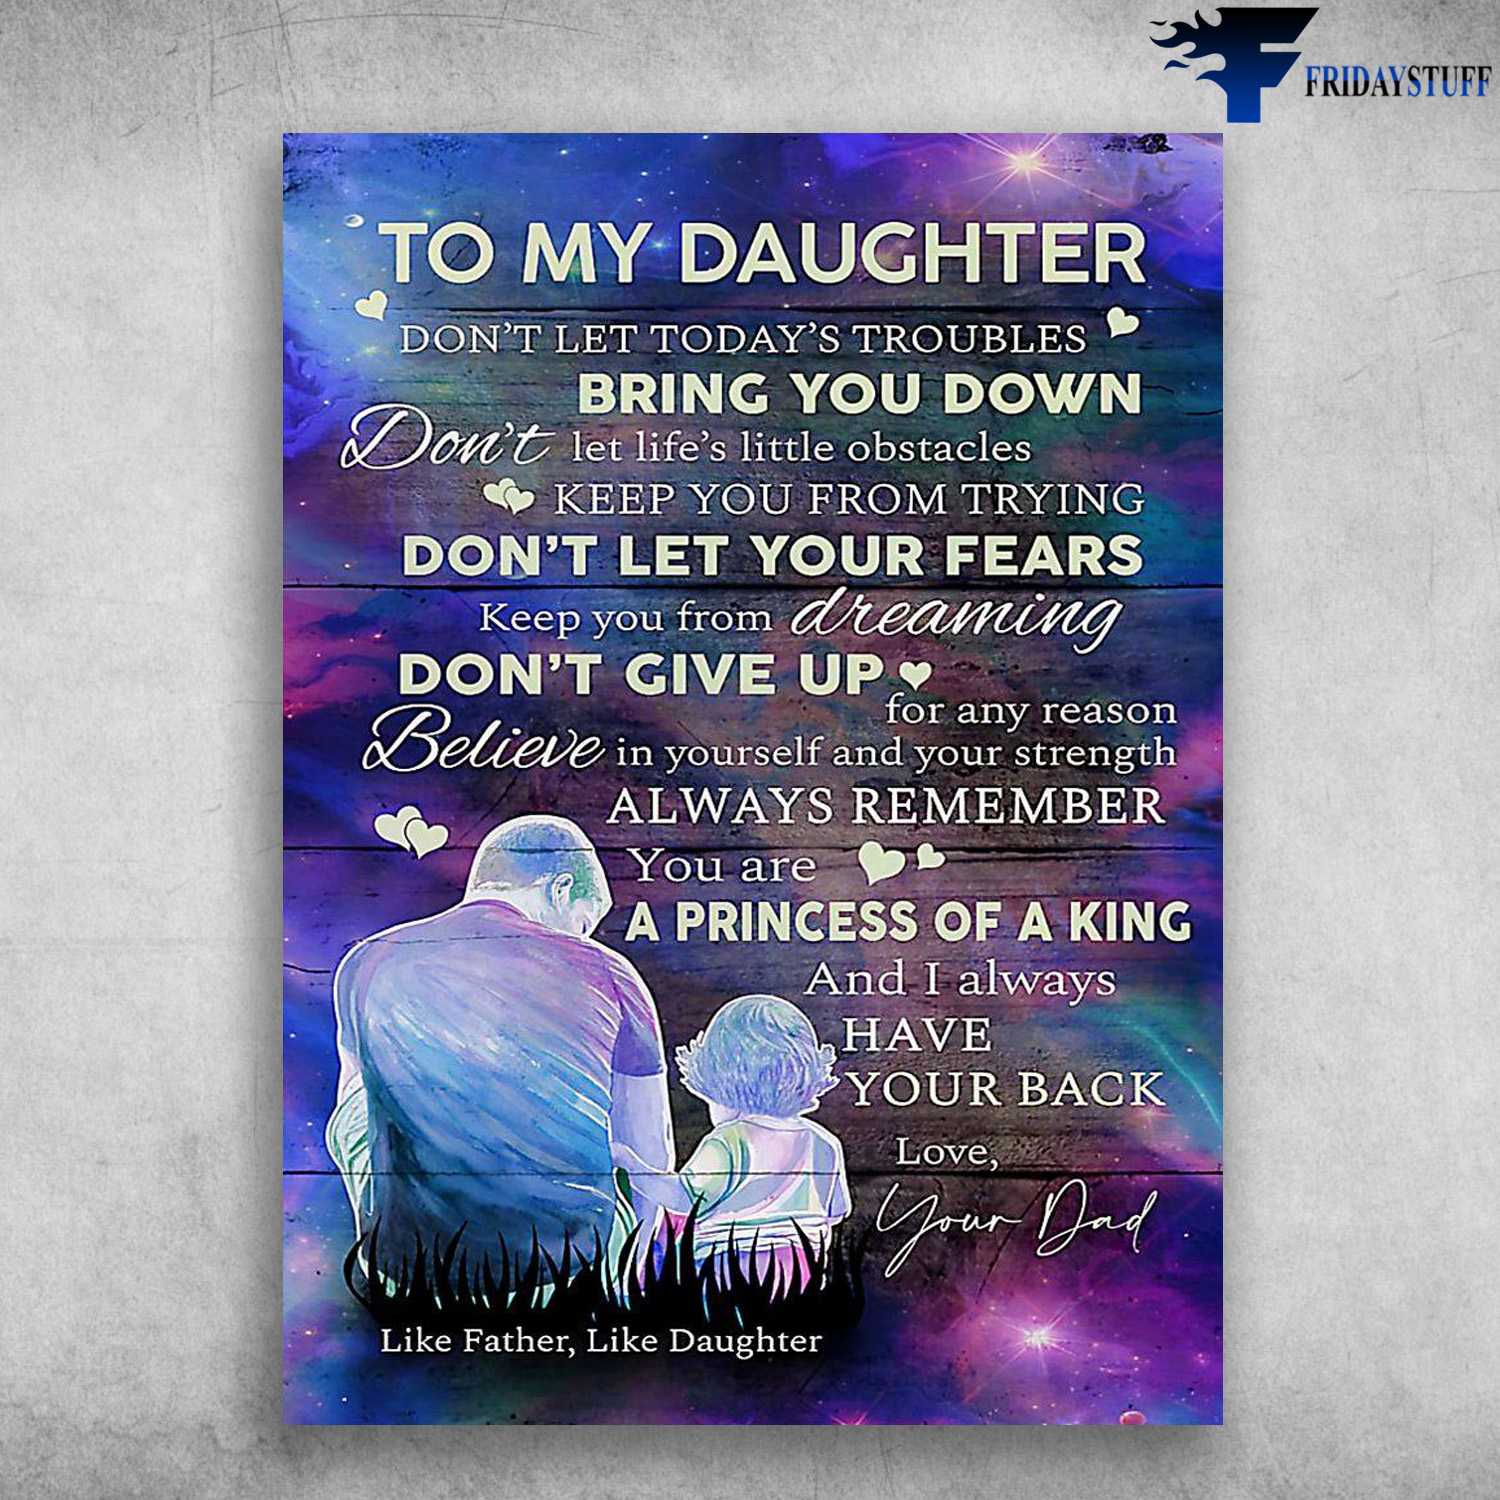 Dad And Daughter, To My Daughter, Don't Let Today's Troubles, Bring You Down, Don't Let Life's Little Obstacles, Like Father, Like Daughter